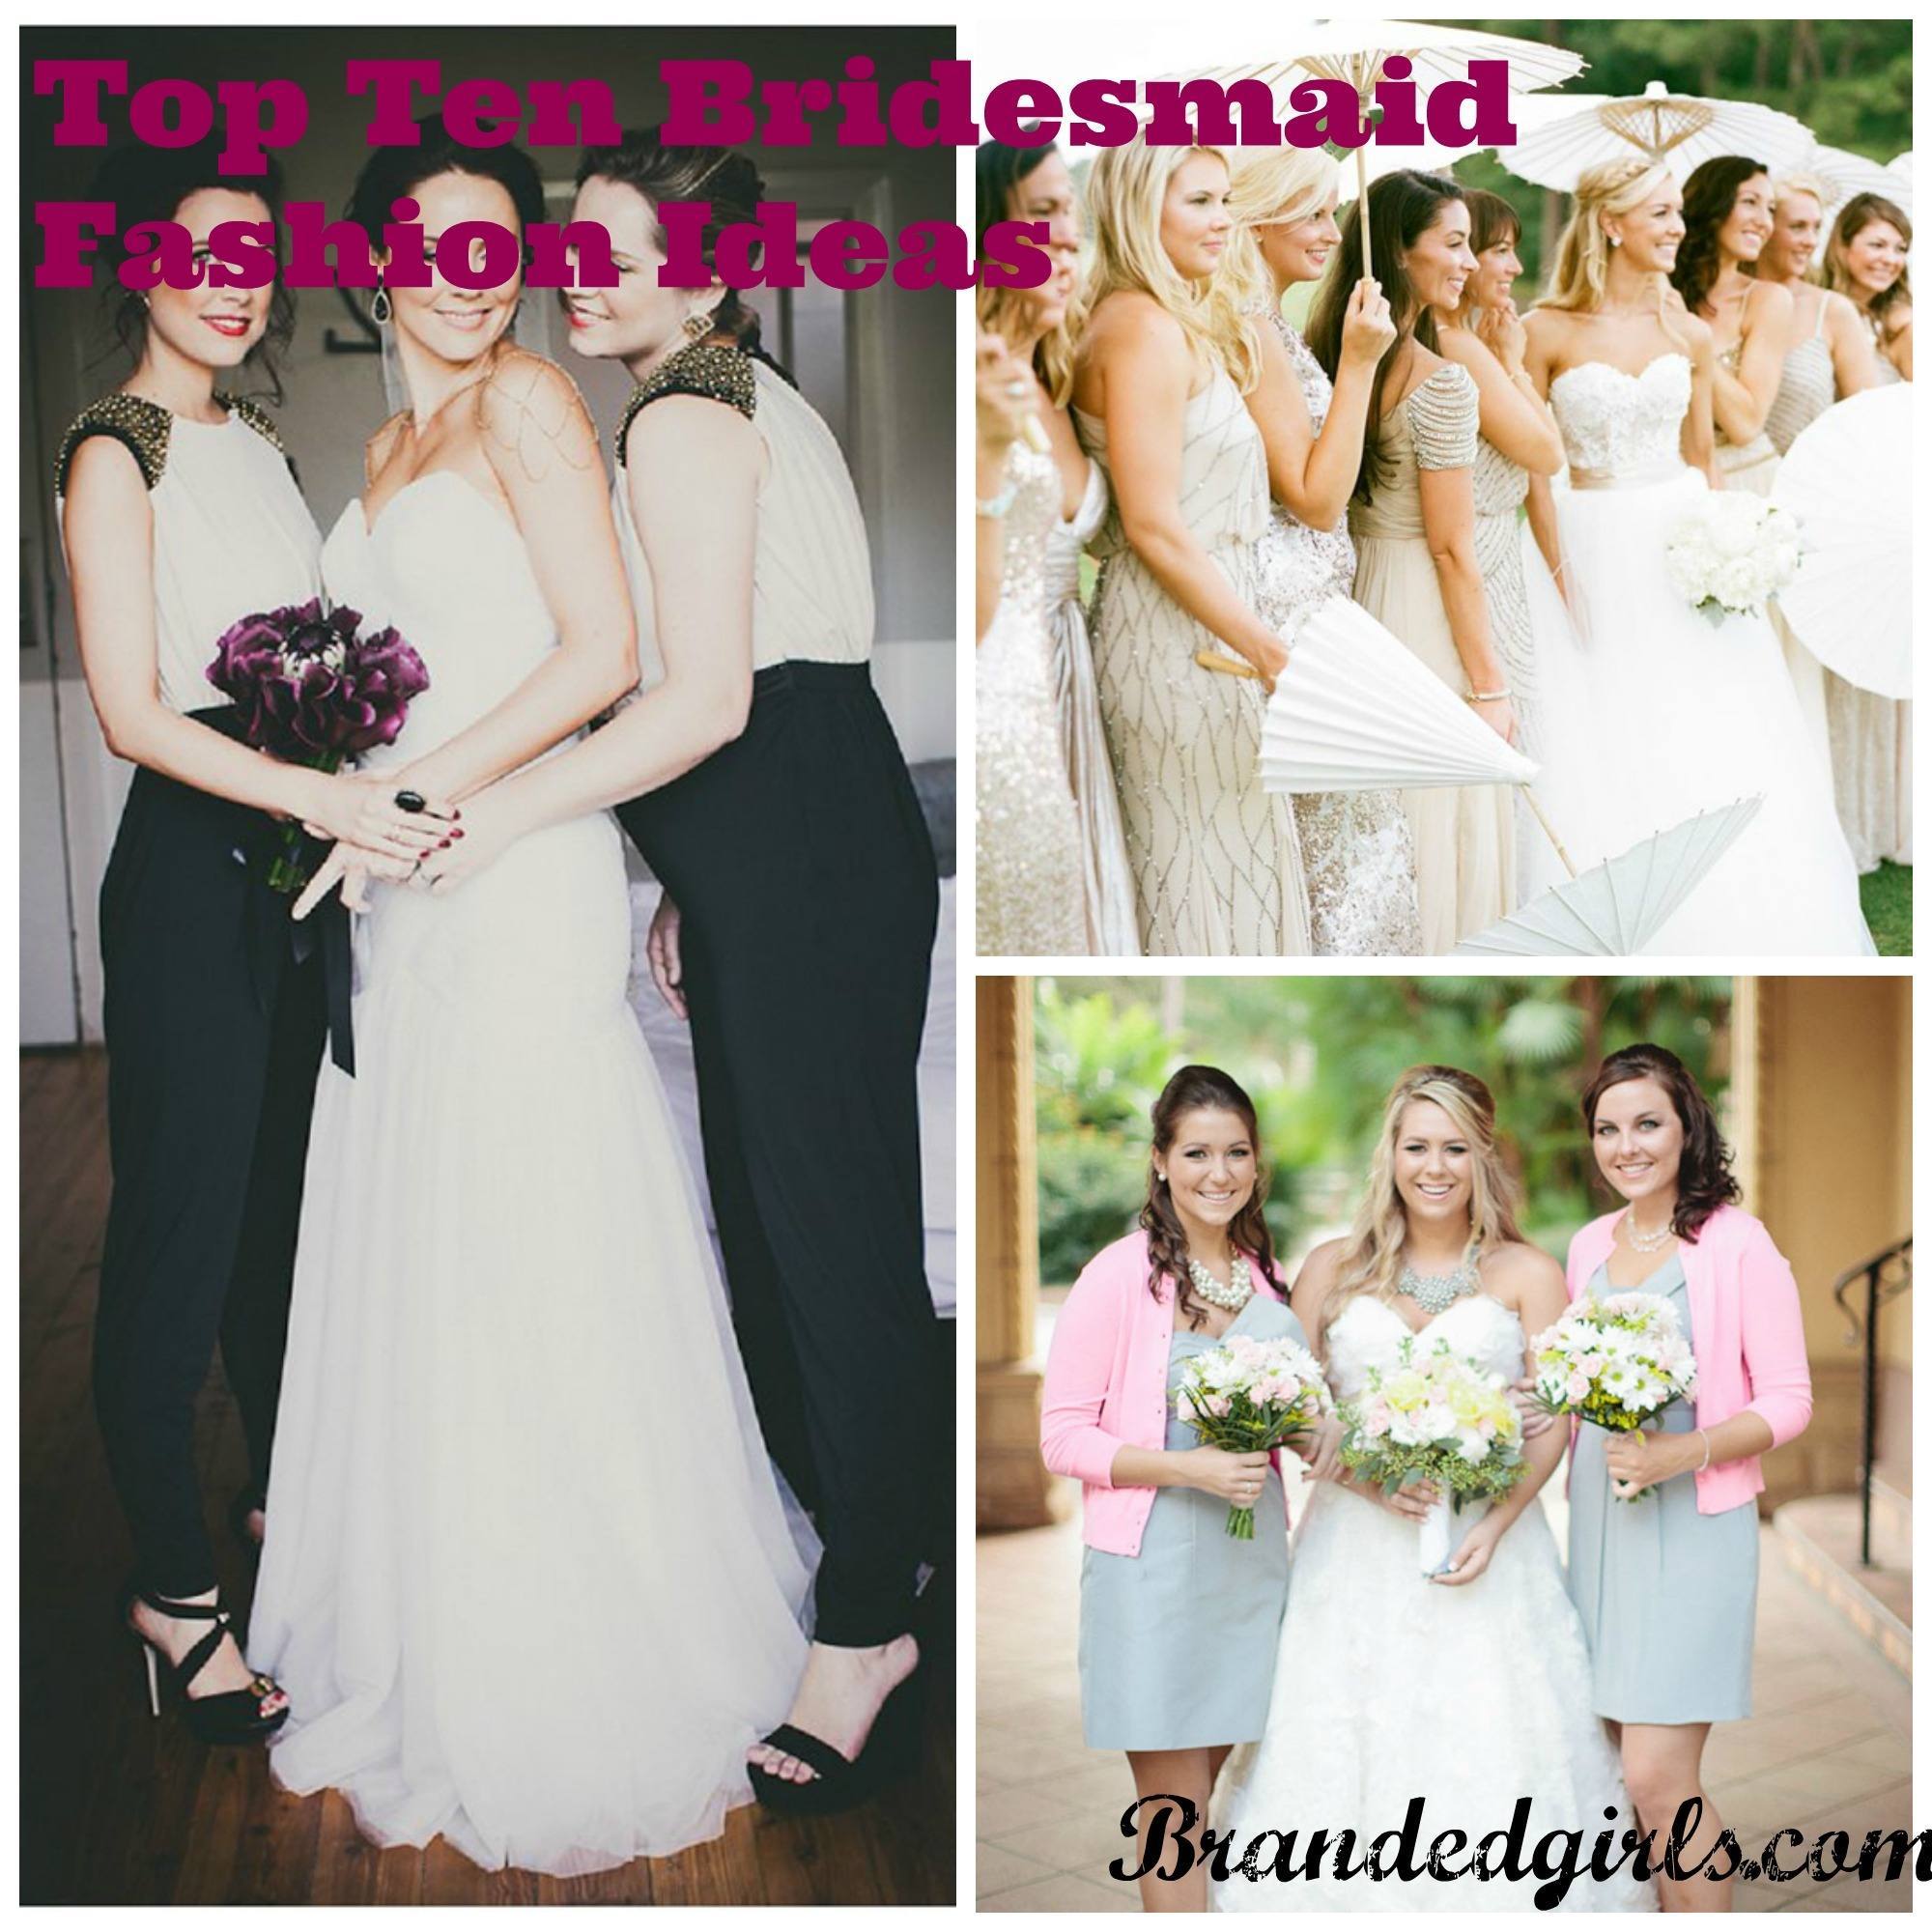 Bridesmaid Outfit Ideas 2022 – What to Wear as a Bridesmaid?